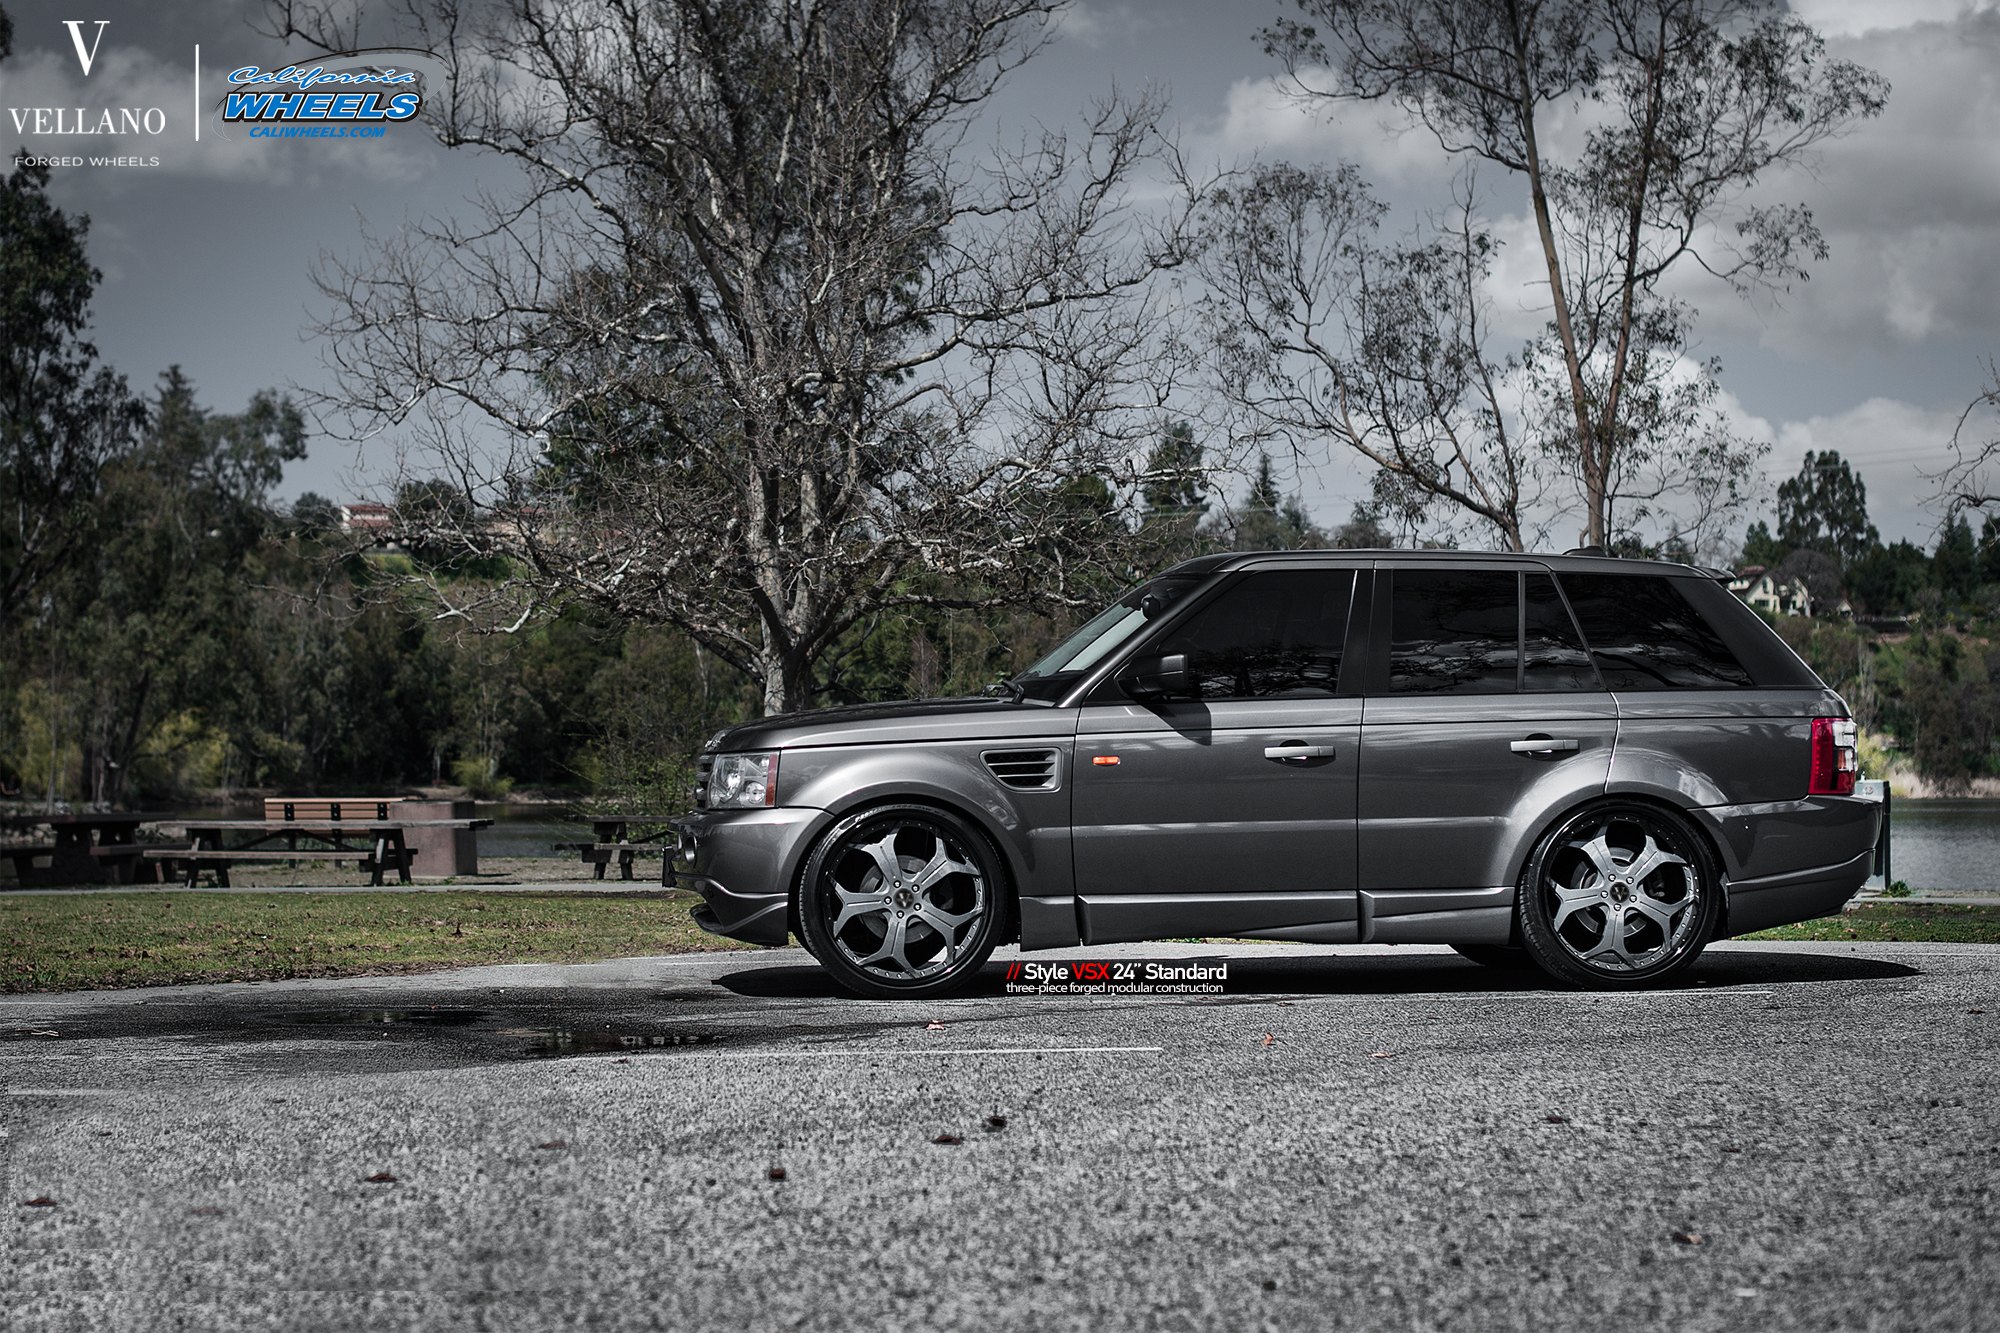 Gray Range Rover Sport with Aftermarket Side Skirts - Photo by Vellano